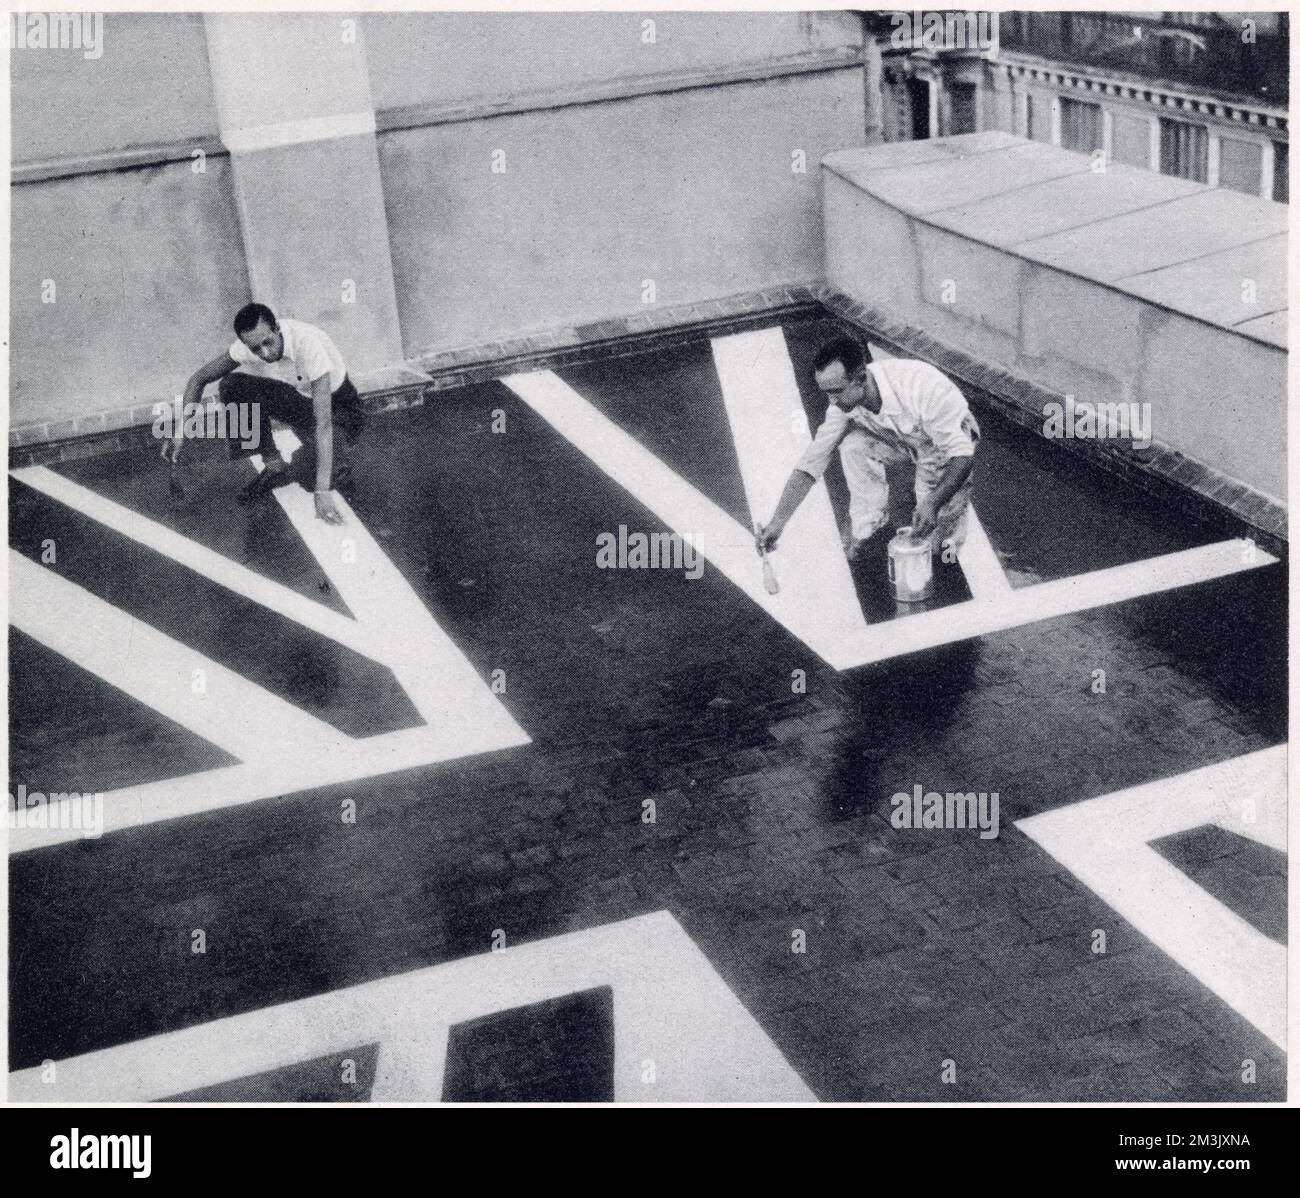 British Embassy staff painting their roof the colours of the Union 'Jack', in an attempt to signify their neutral presence to Nationalist bombers during the Spanish Civil War, Madrid, 1936.   The Spanish Civil War, which started in 1936 between the Republican Government and the Nationalist Rebels, featured some of the earliest heavy bombing of civilian areas. Stock Photo